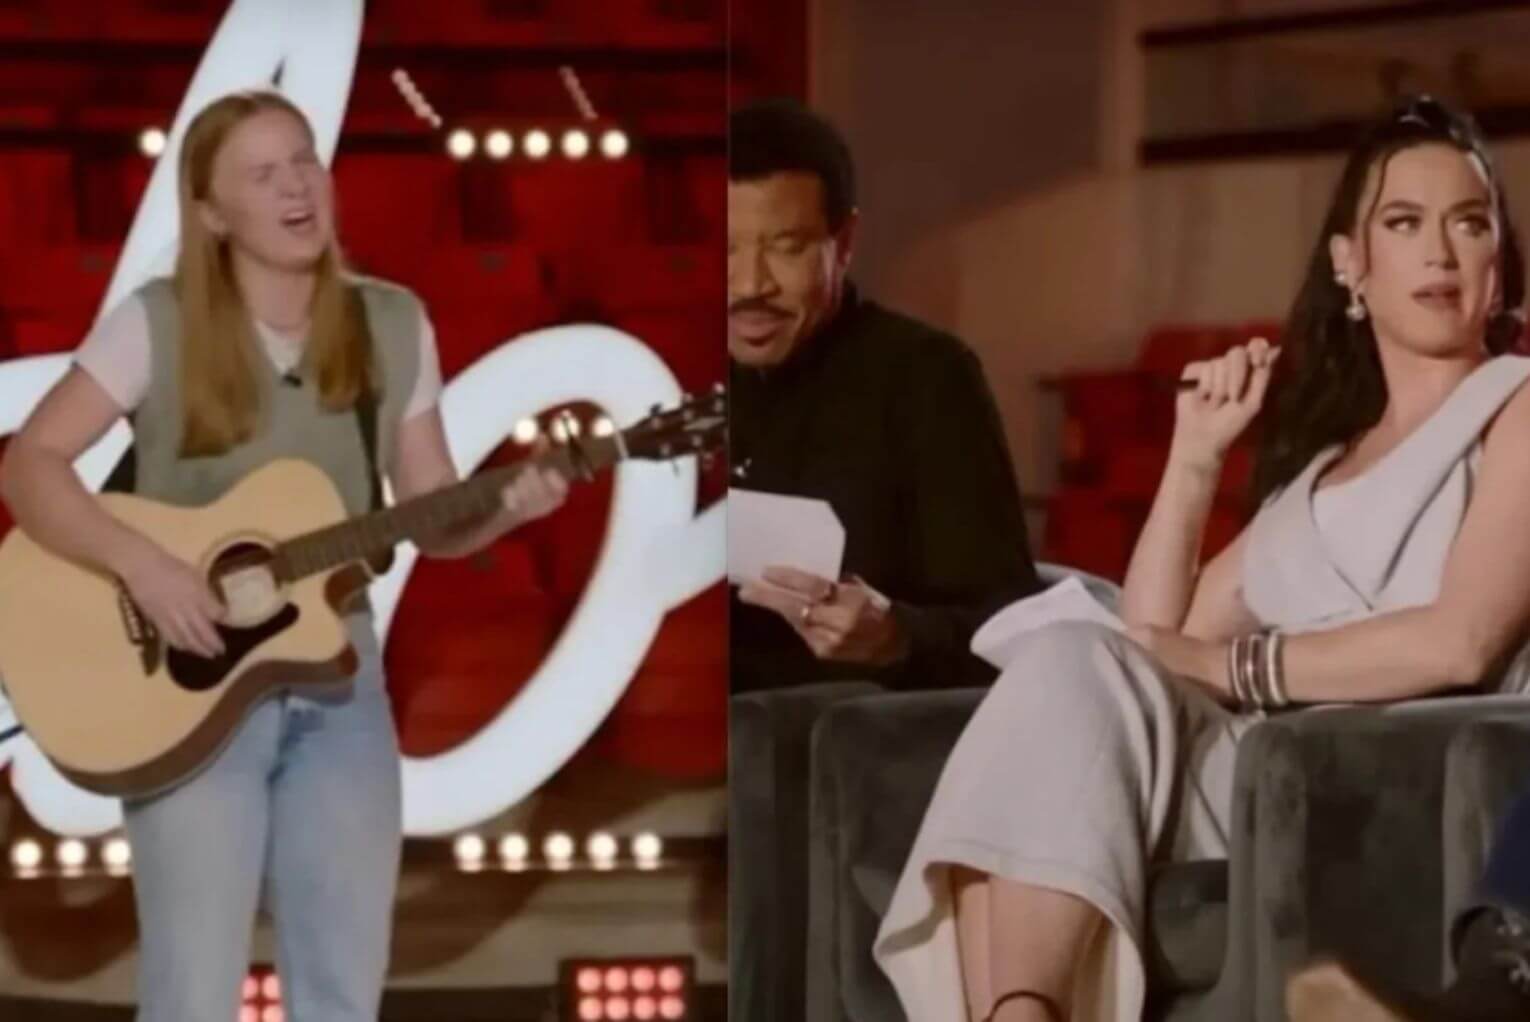 Christian Teen Wows ‘American Idol’ With Powerful Song About God and Sin